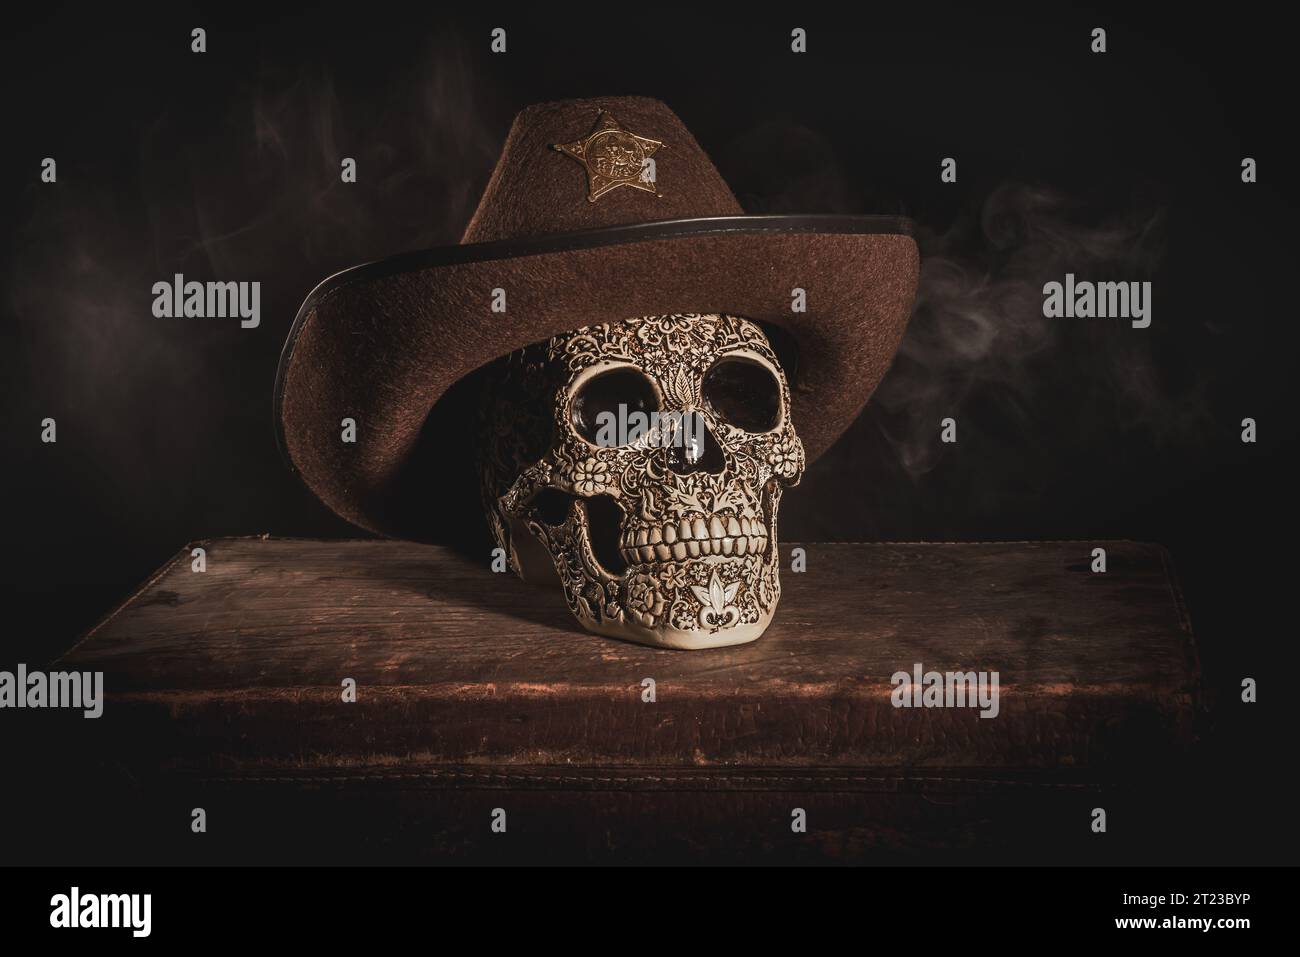 A closeup shot of a skull with Mexican patterns wearing a cowboy hat on a wooden table Stock Photo